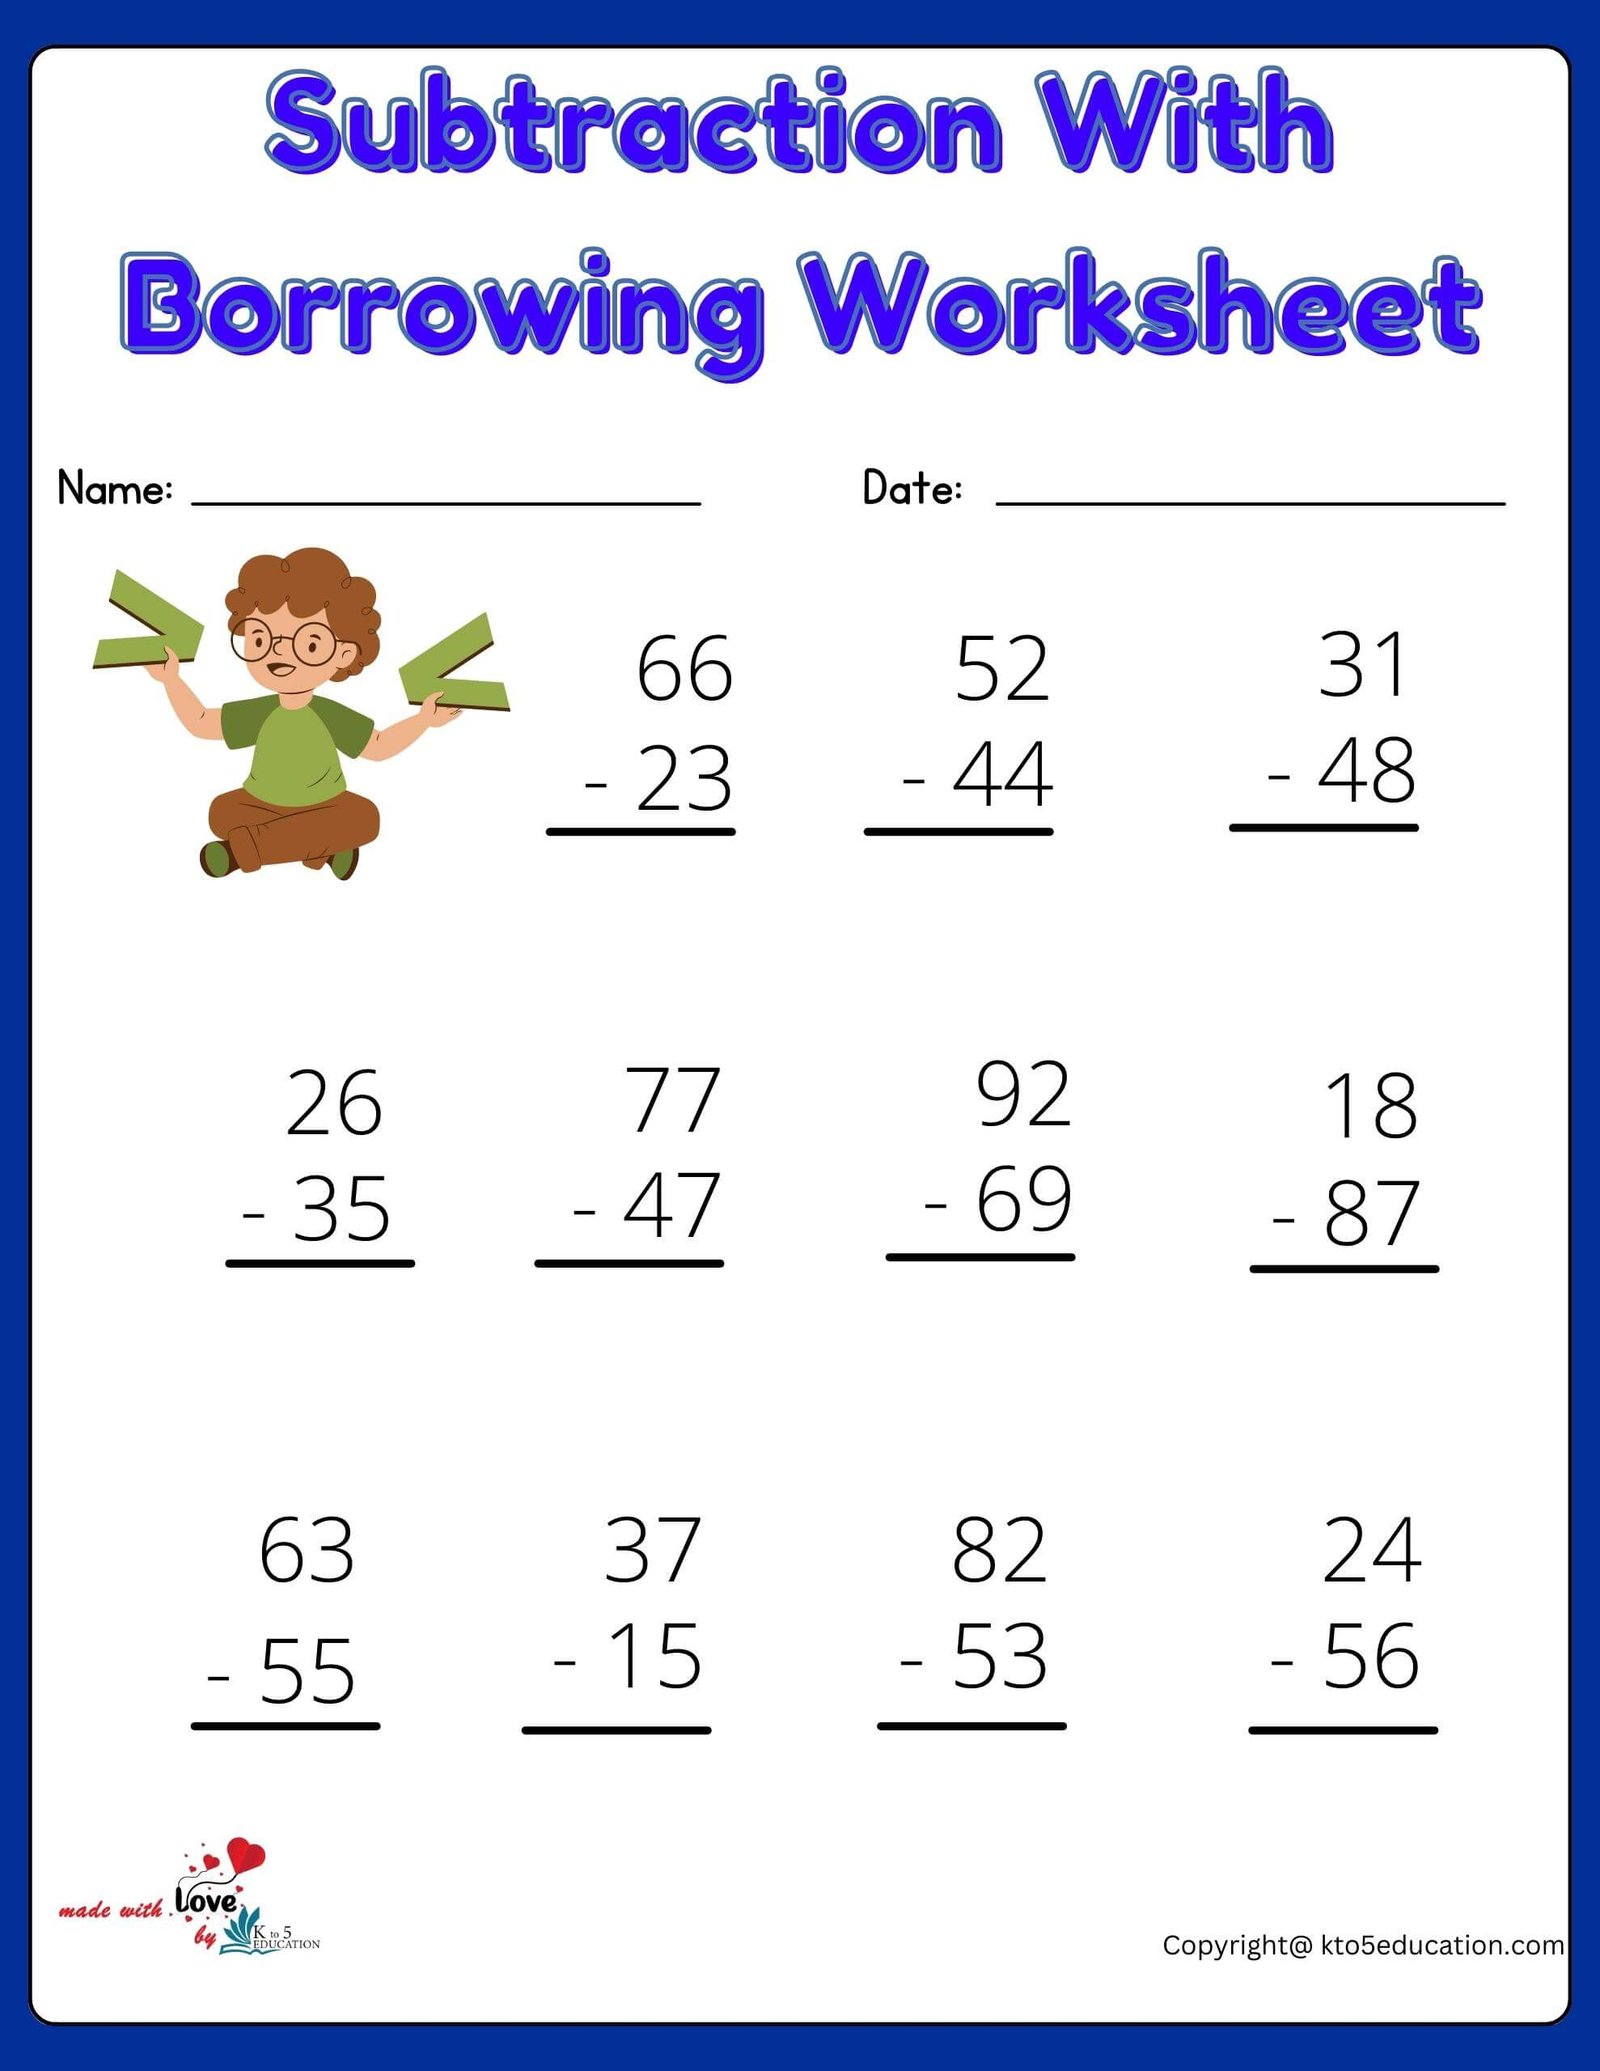 Subtractions With Borrowing Worksheets Printable